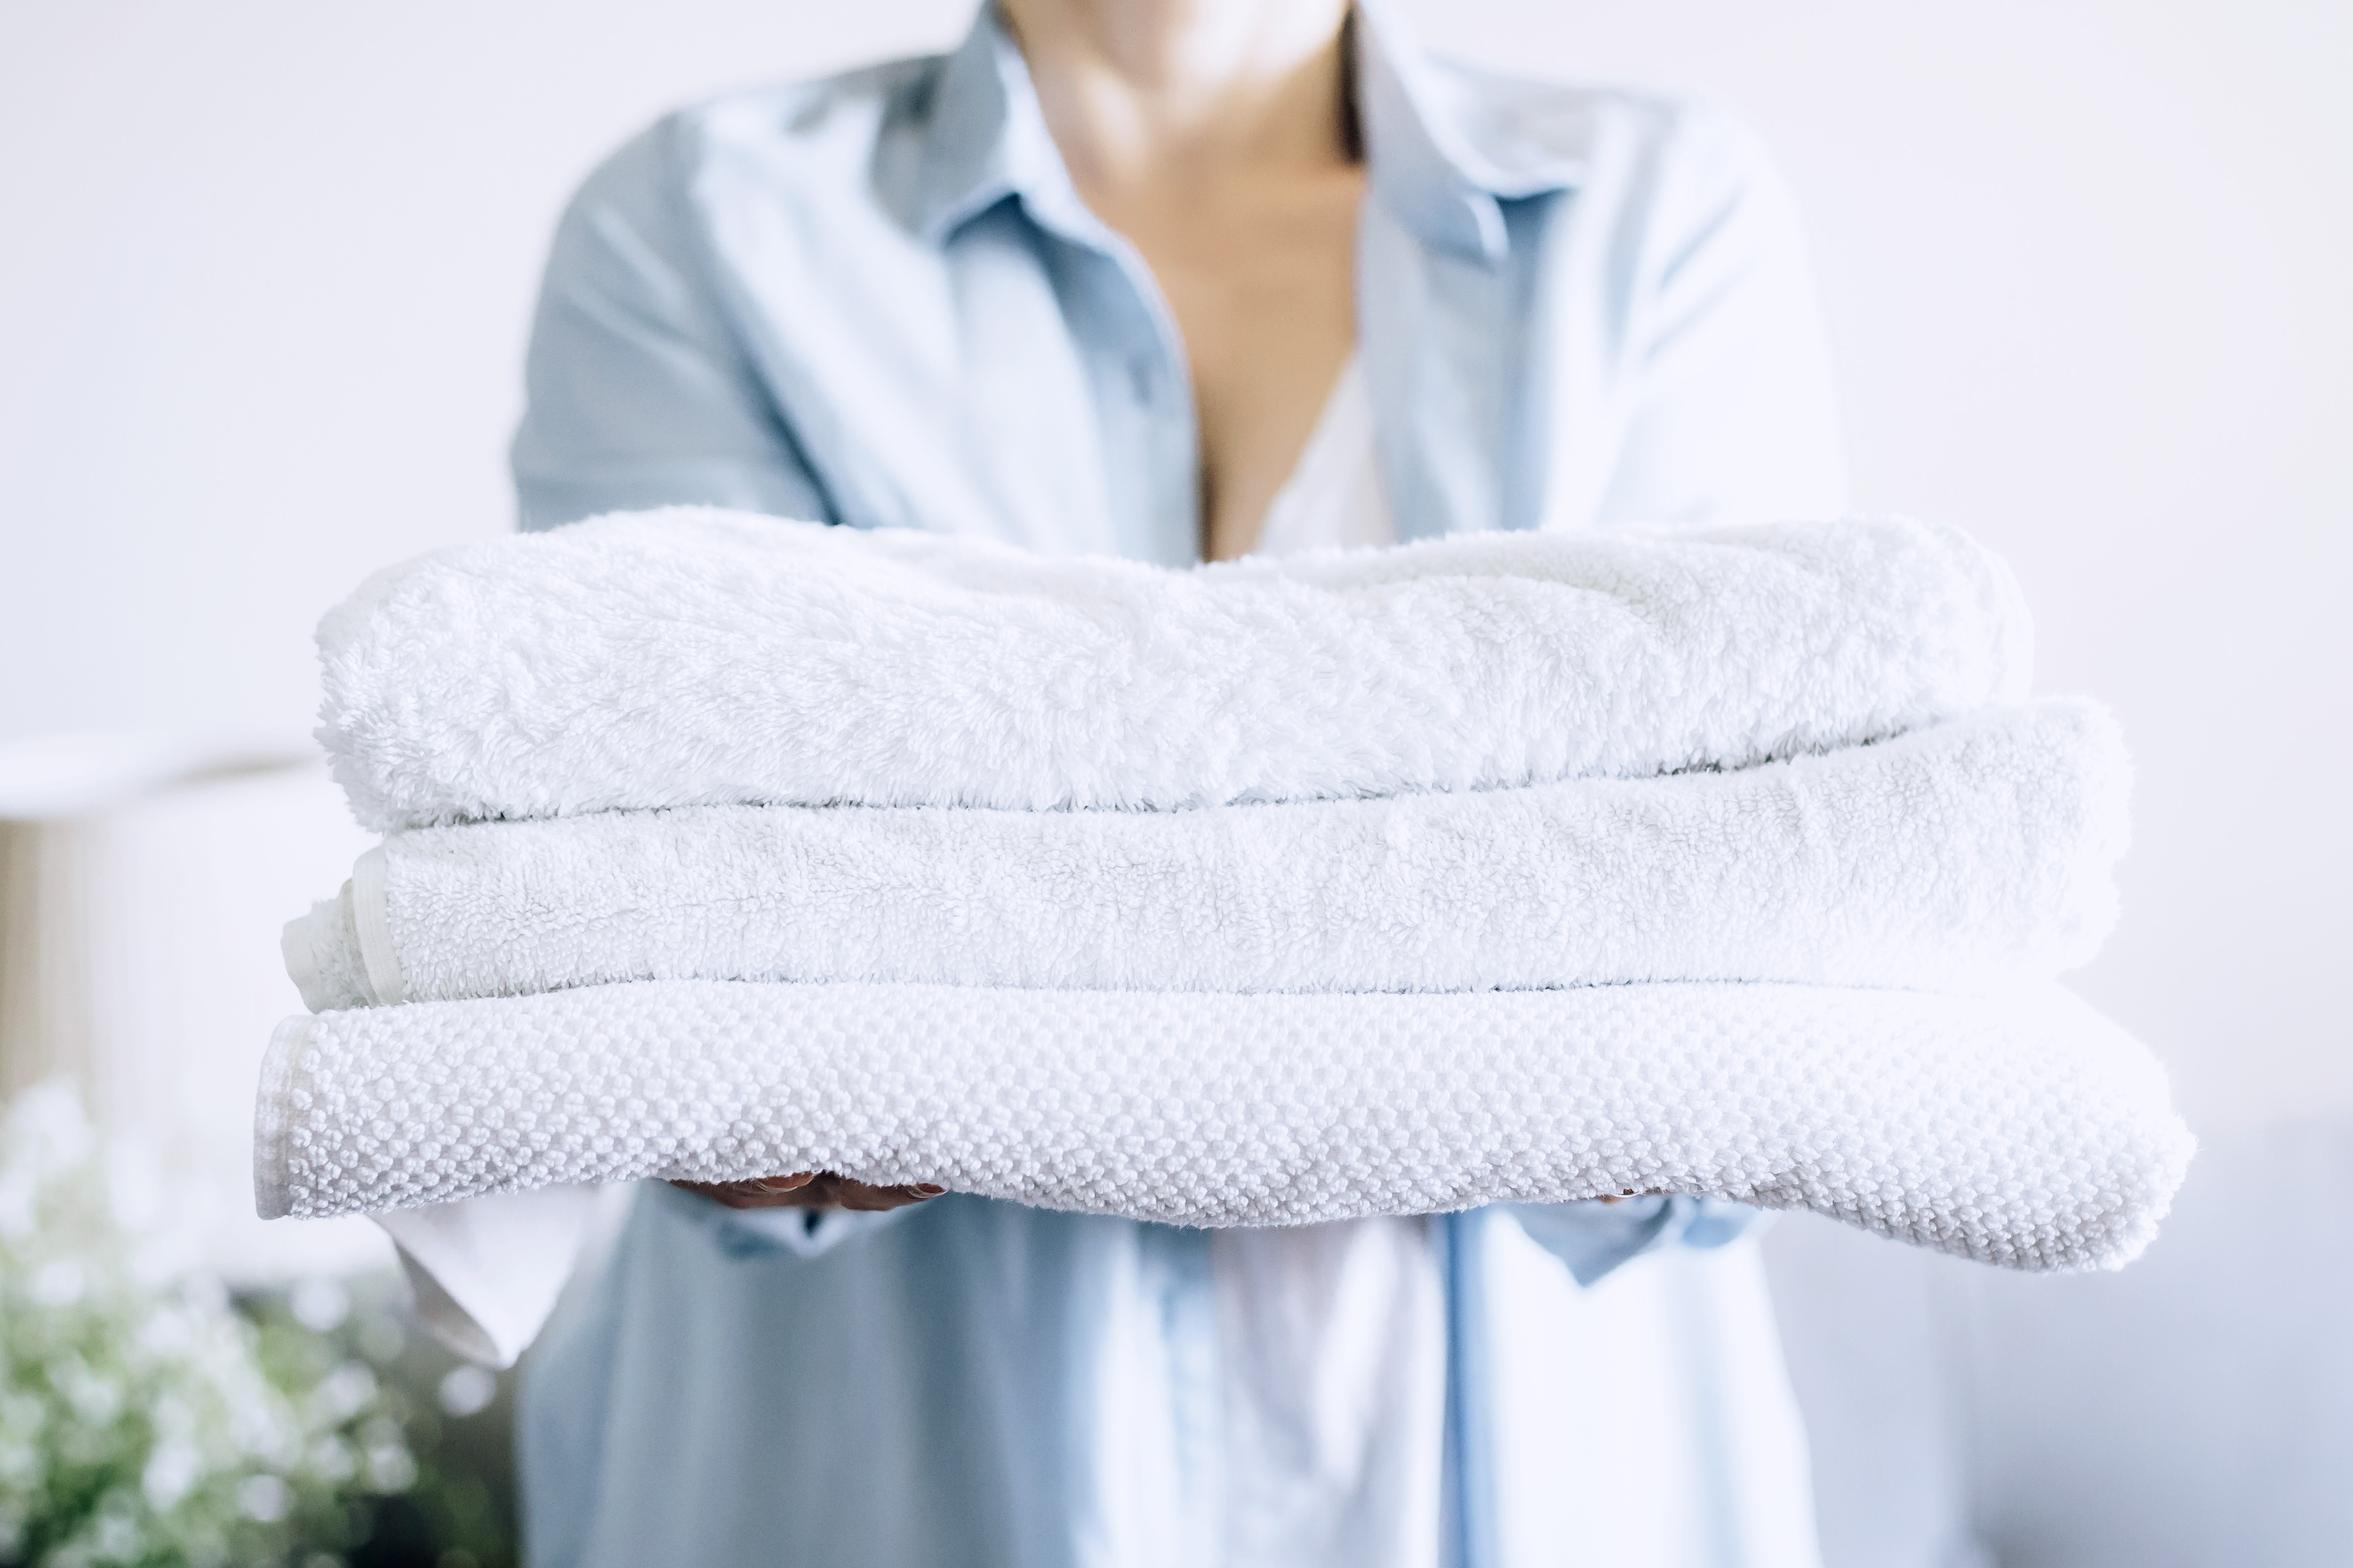 How to Keep White Towels White